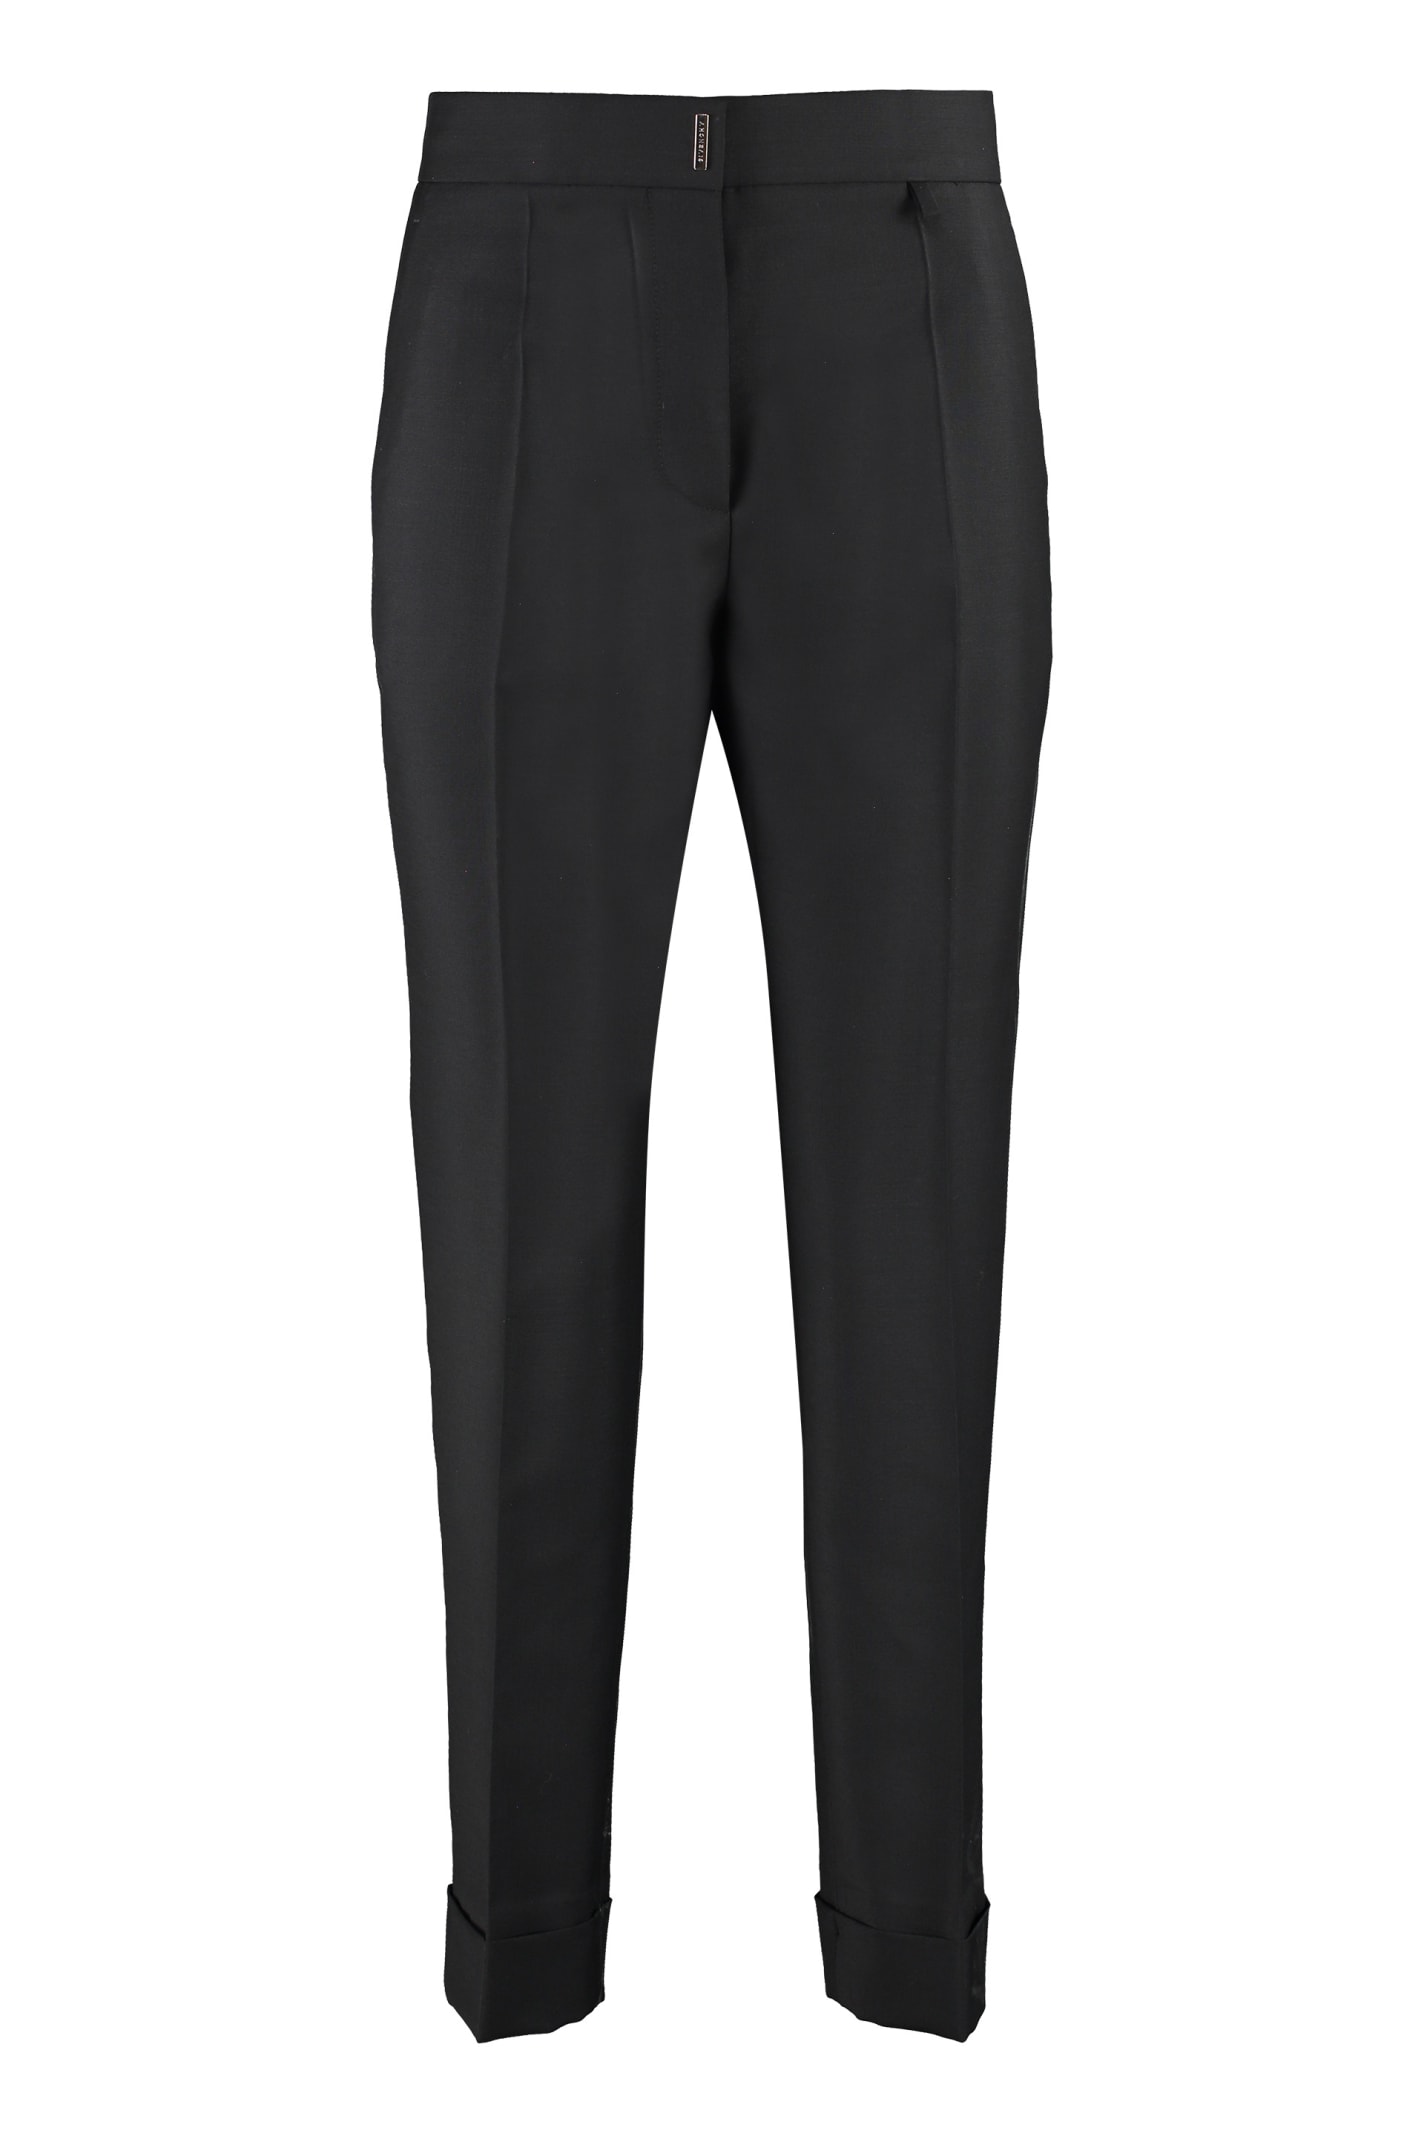 Givenchy Wool Blend Slim Fit Tailored Trousers